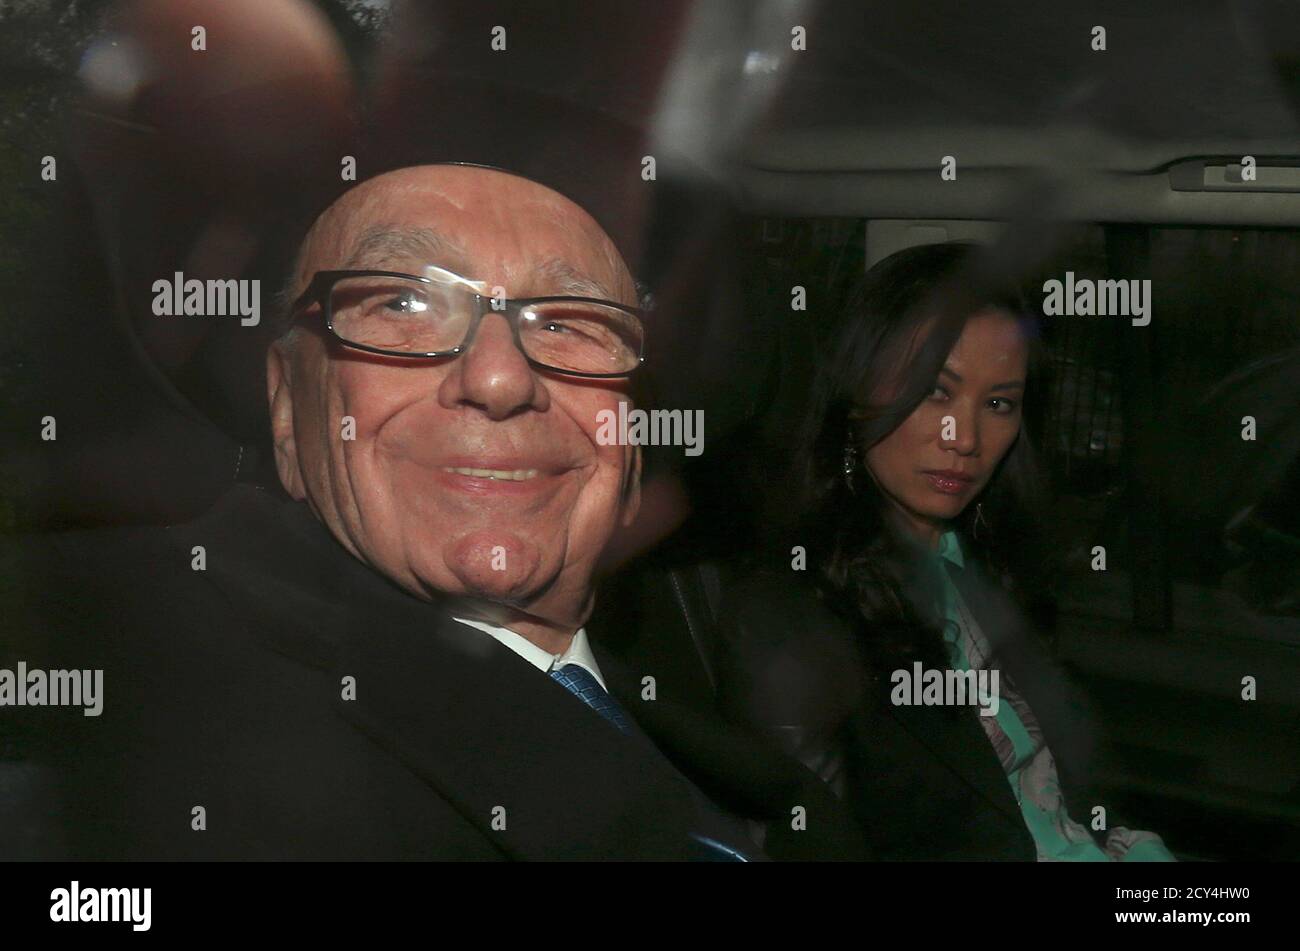 Rupert Murdoch, with his wife Wendi, is driven away after giving evidence to the Leveson Inquiry in the High Court in central London April 25, 2012. Murdoch rejected accusations on Wednesday that he used his media empire to play puppet master to a succession of British prime ministers, electrifying a media inquiry that has shaken the government and unnerved much of the establishment.     REUTERS/Suzanne Plunkett   (BRITAIN - Tags: ENTERTAINMENT MEDIA BUSINESS CRIME LAW POLITICS SOCIETY) Stock Photo